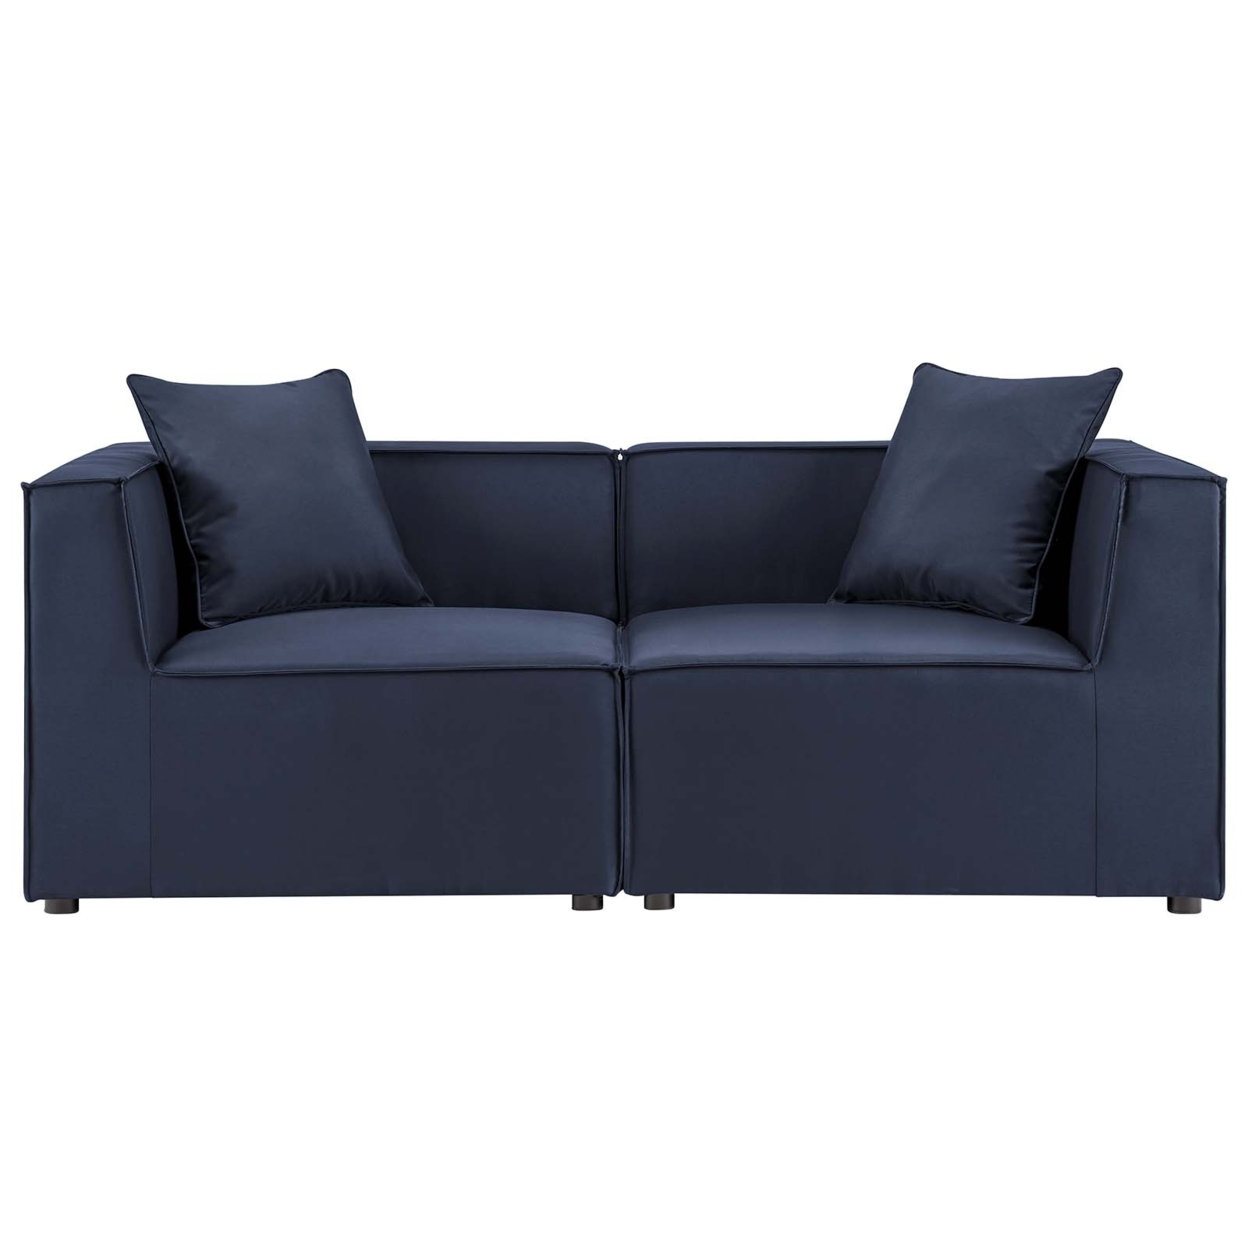 Saybrook Outdoor Patio Upholstered 2-Piece Sectional Sofa Loveseat, Navy